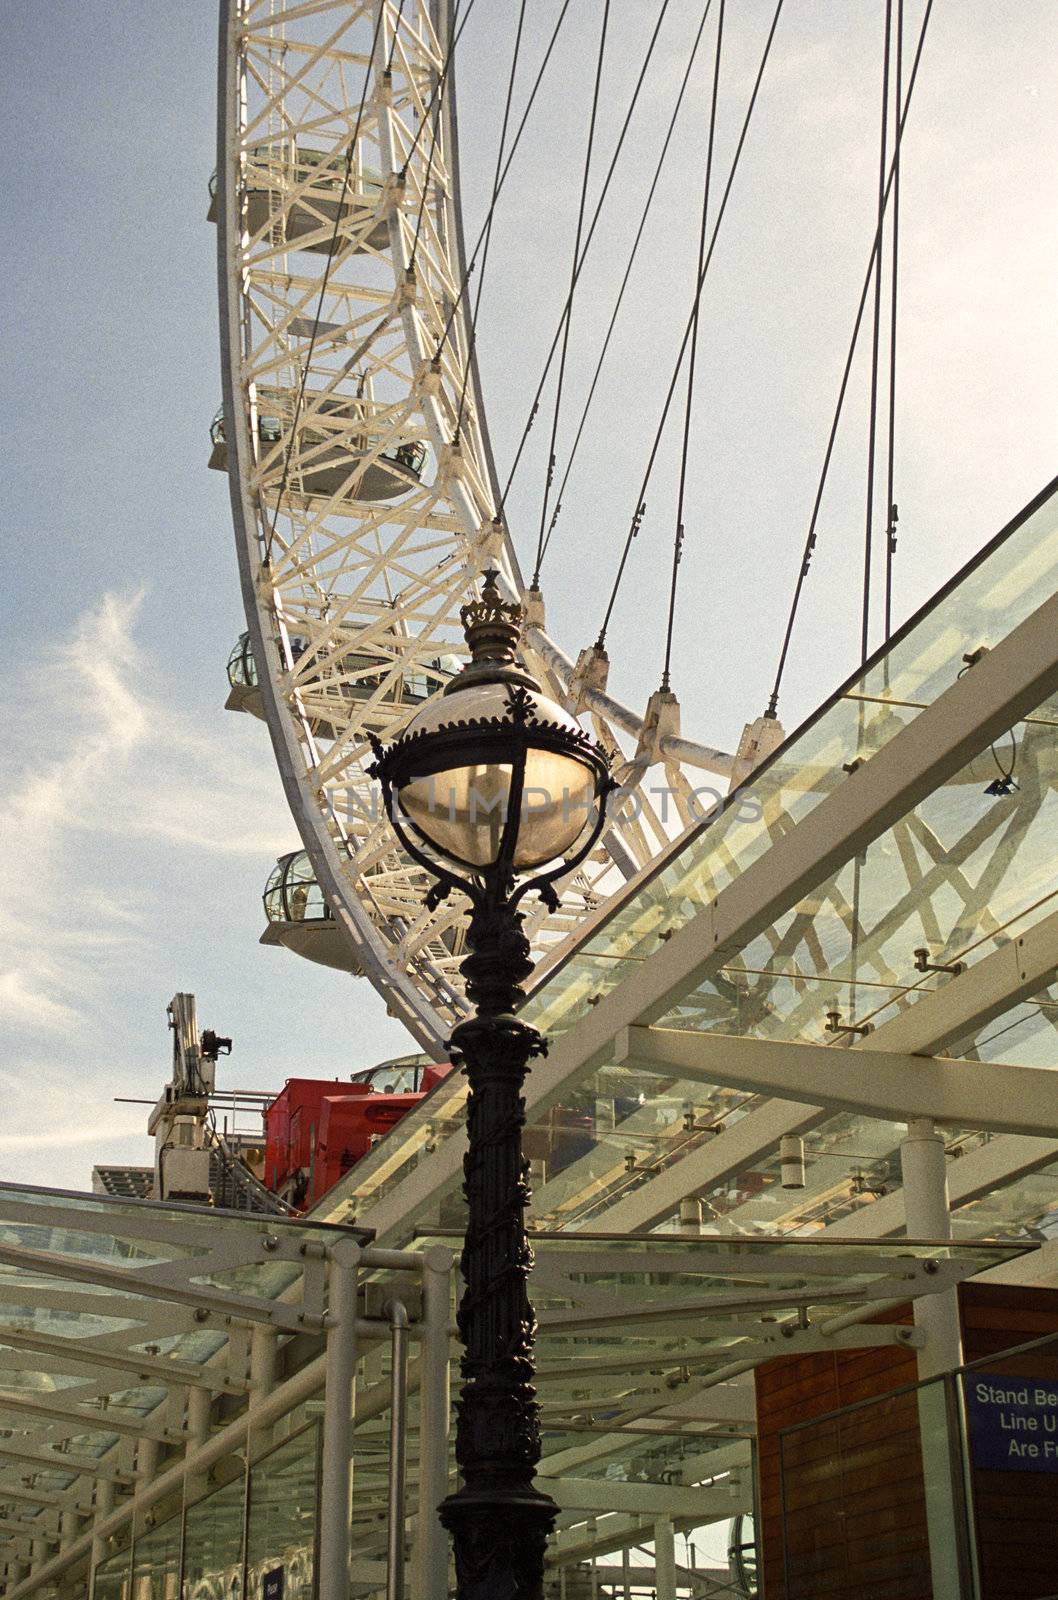 Take Off Point for the London Eye by pjhpix